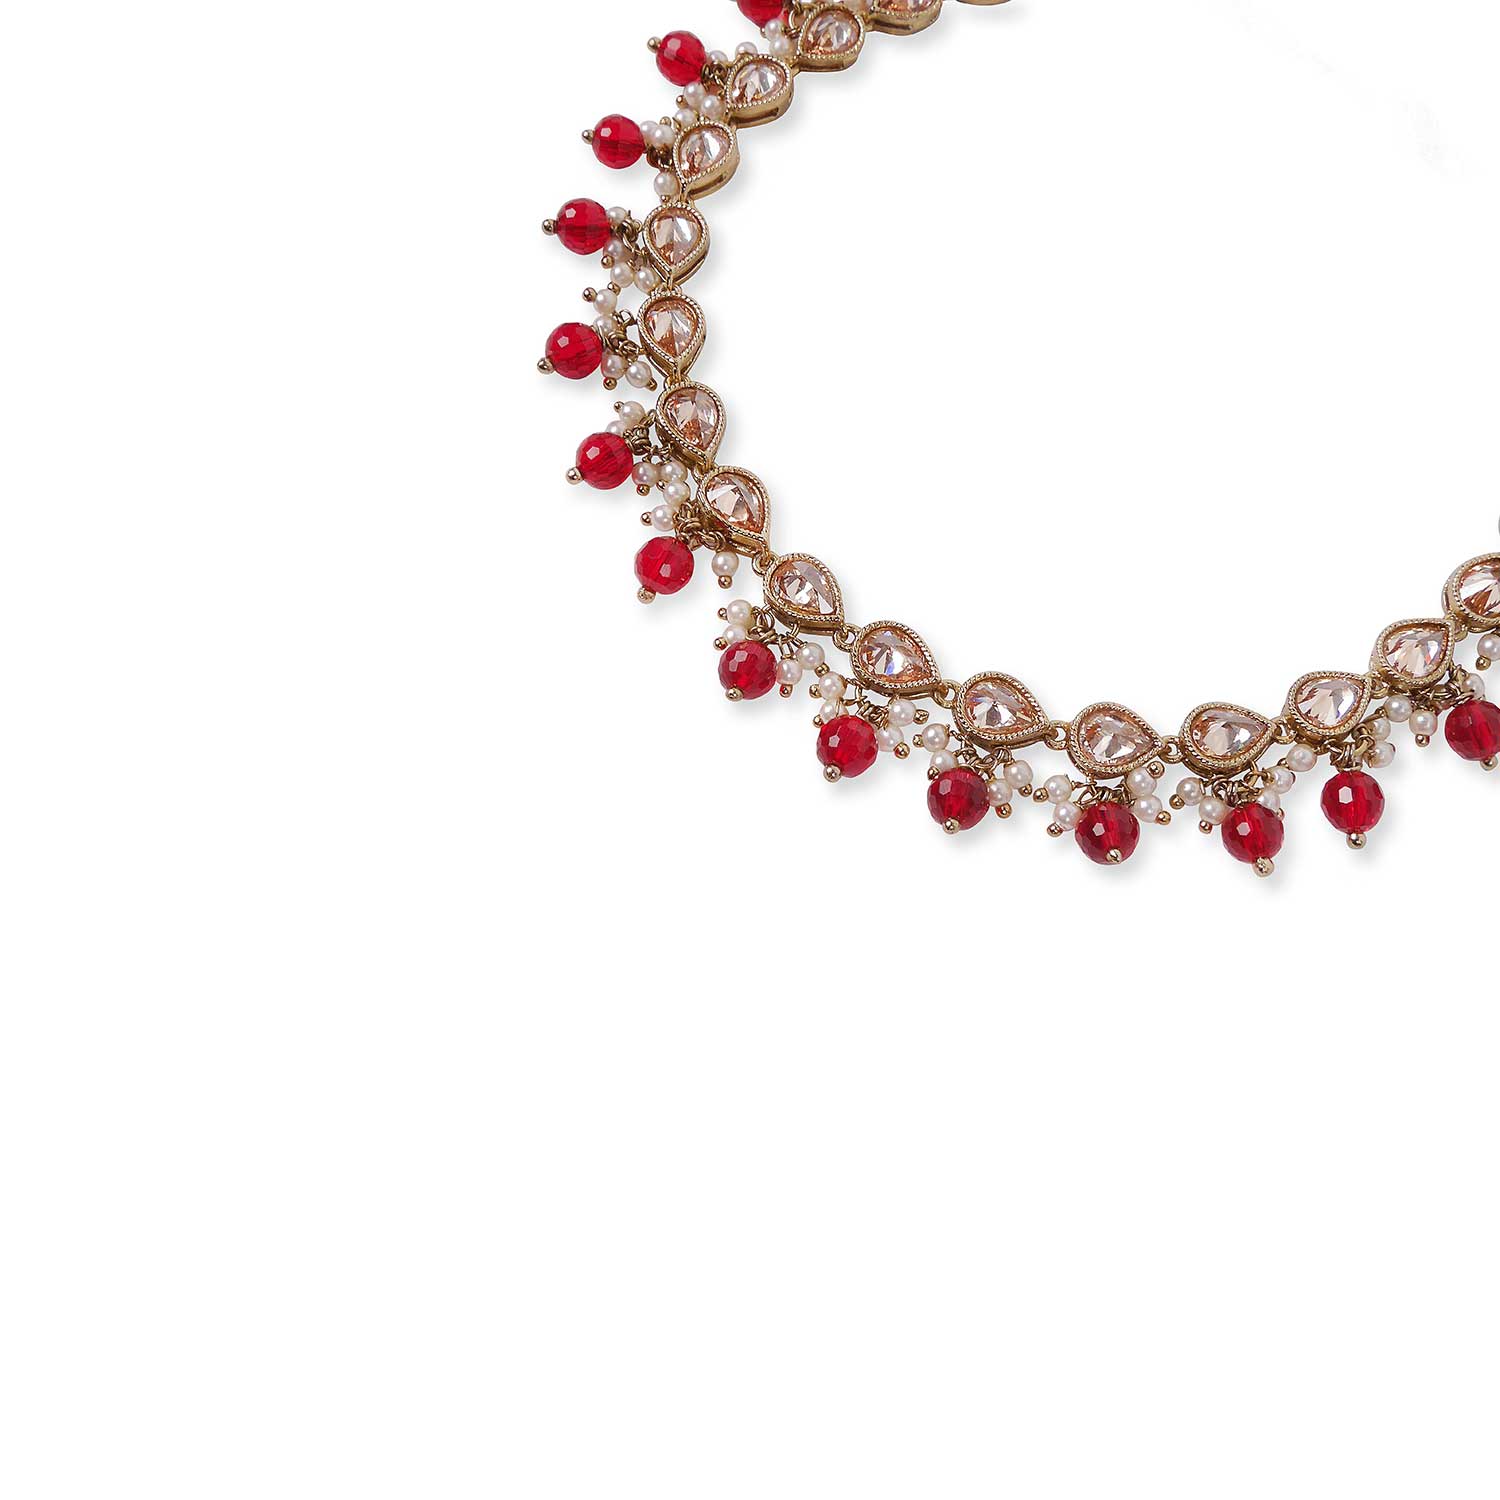 Cluster Anklet in Pearl and Maroon Bead